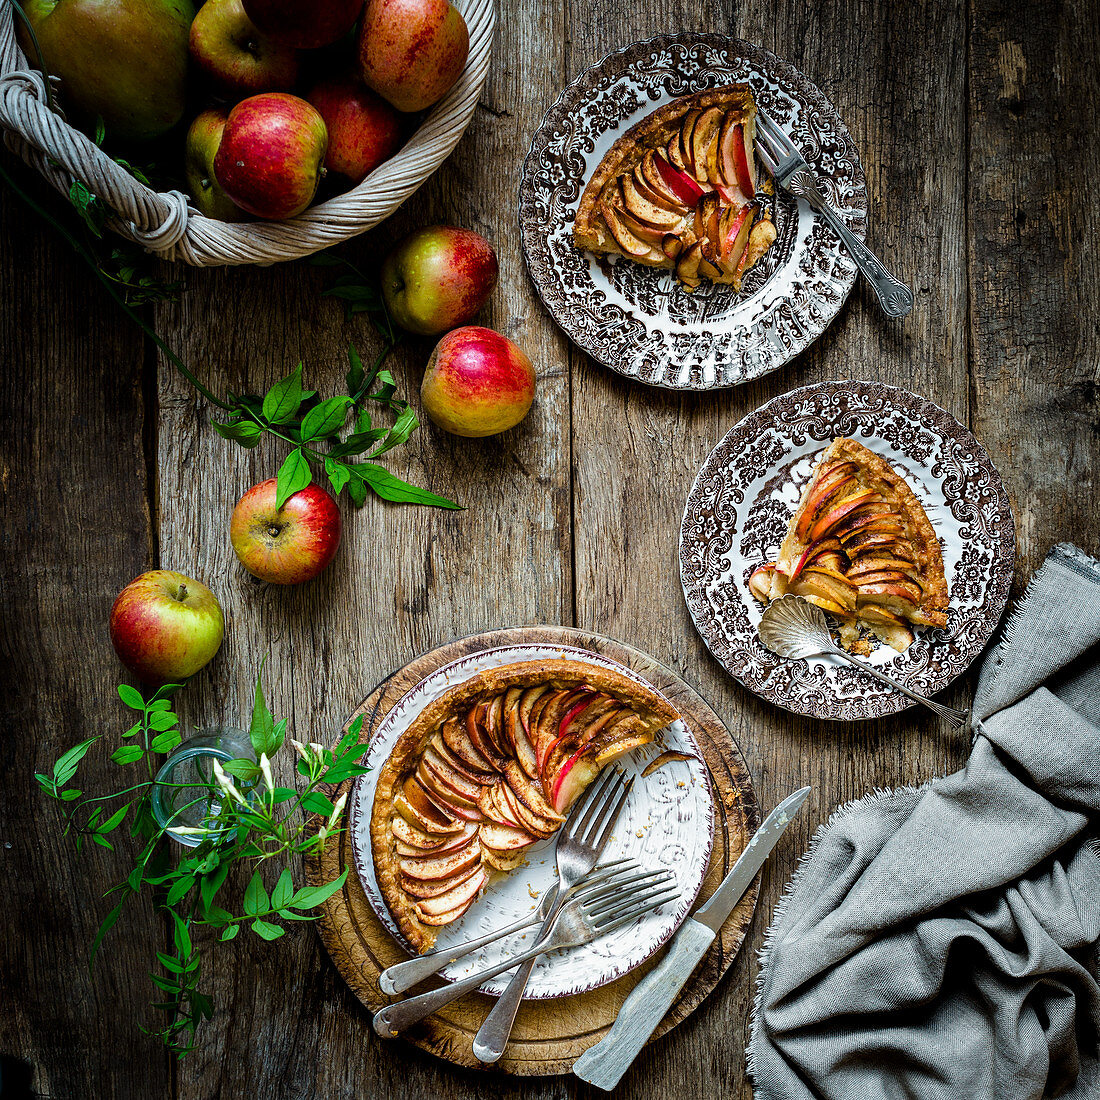 French apple pie with eating apples